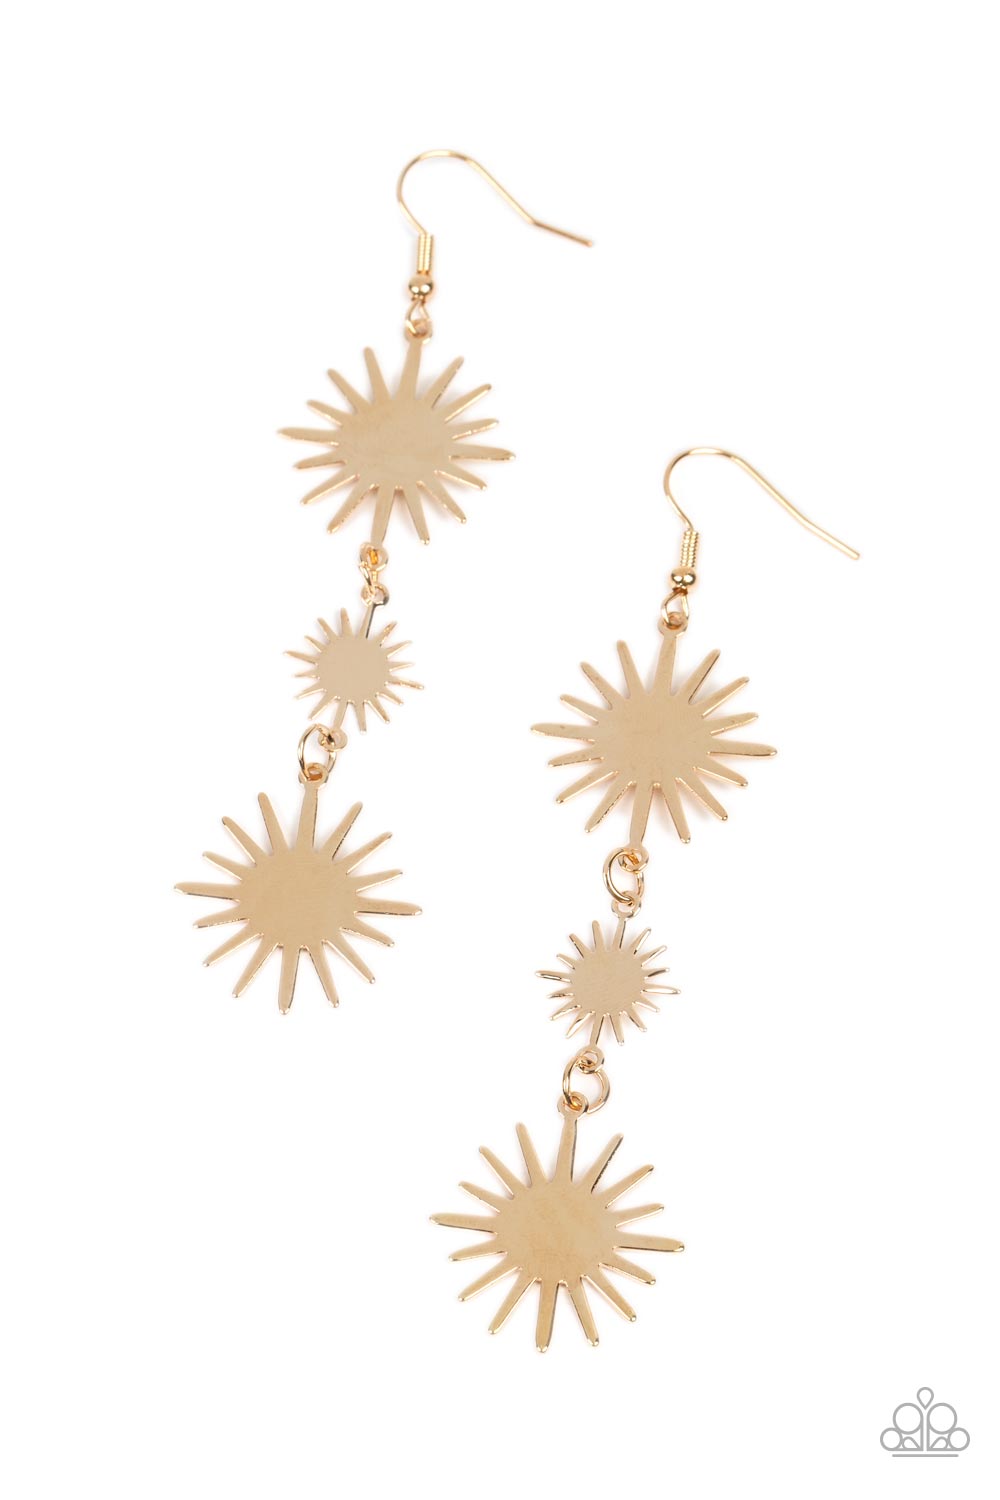 Varying in size, a trio of starry gold sunburst frames delicately links into a lengthened lure for a celestial vibe